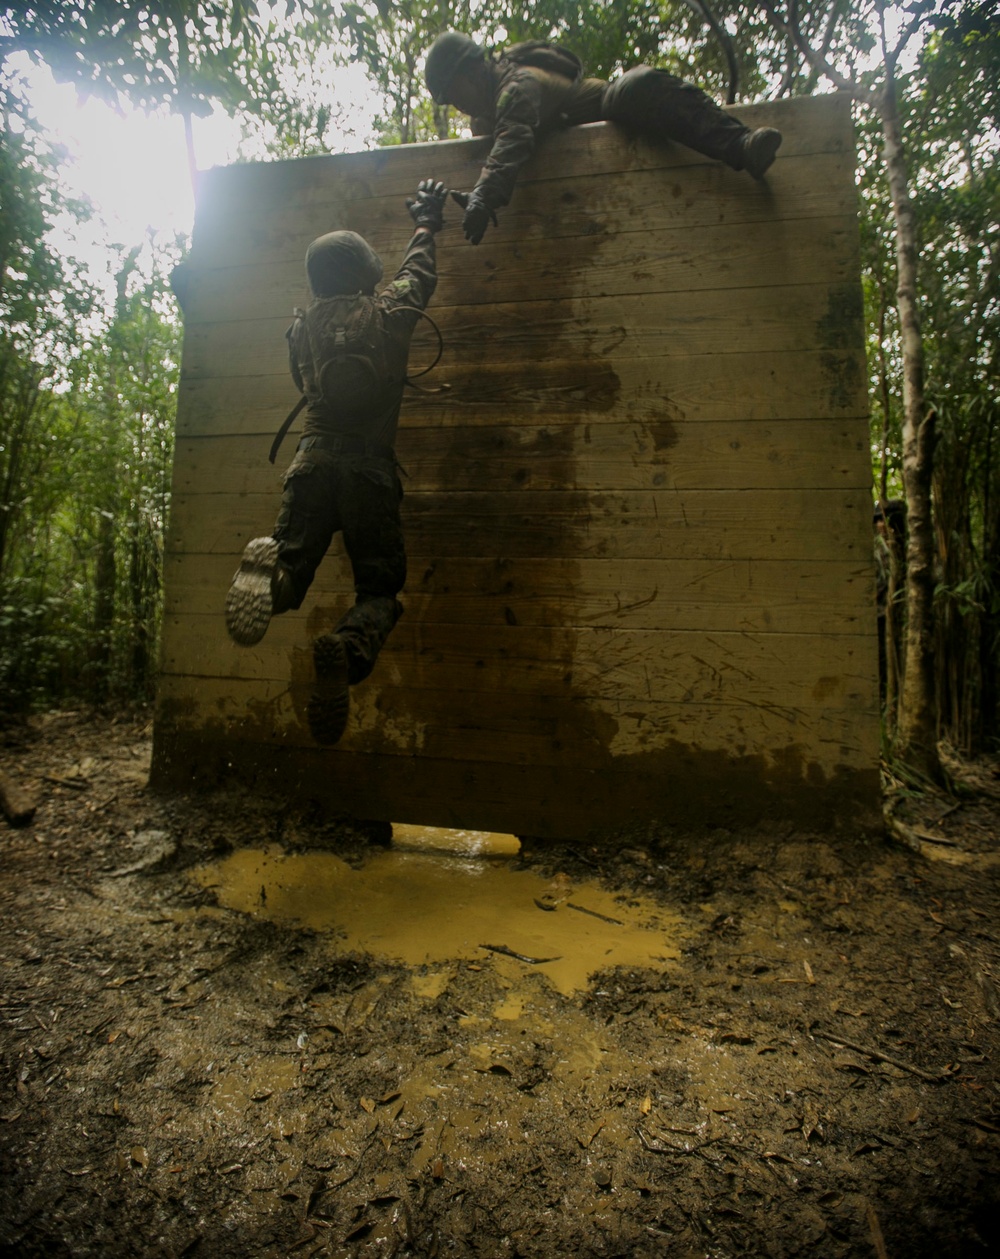 Welcome to the Jungle Warfare Training Center